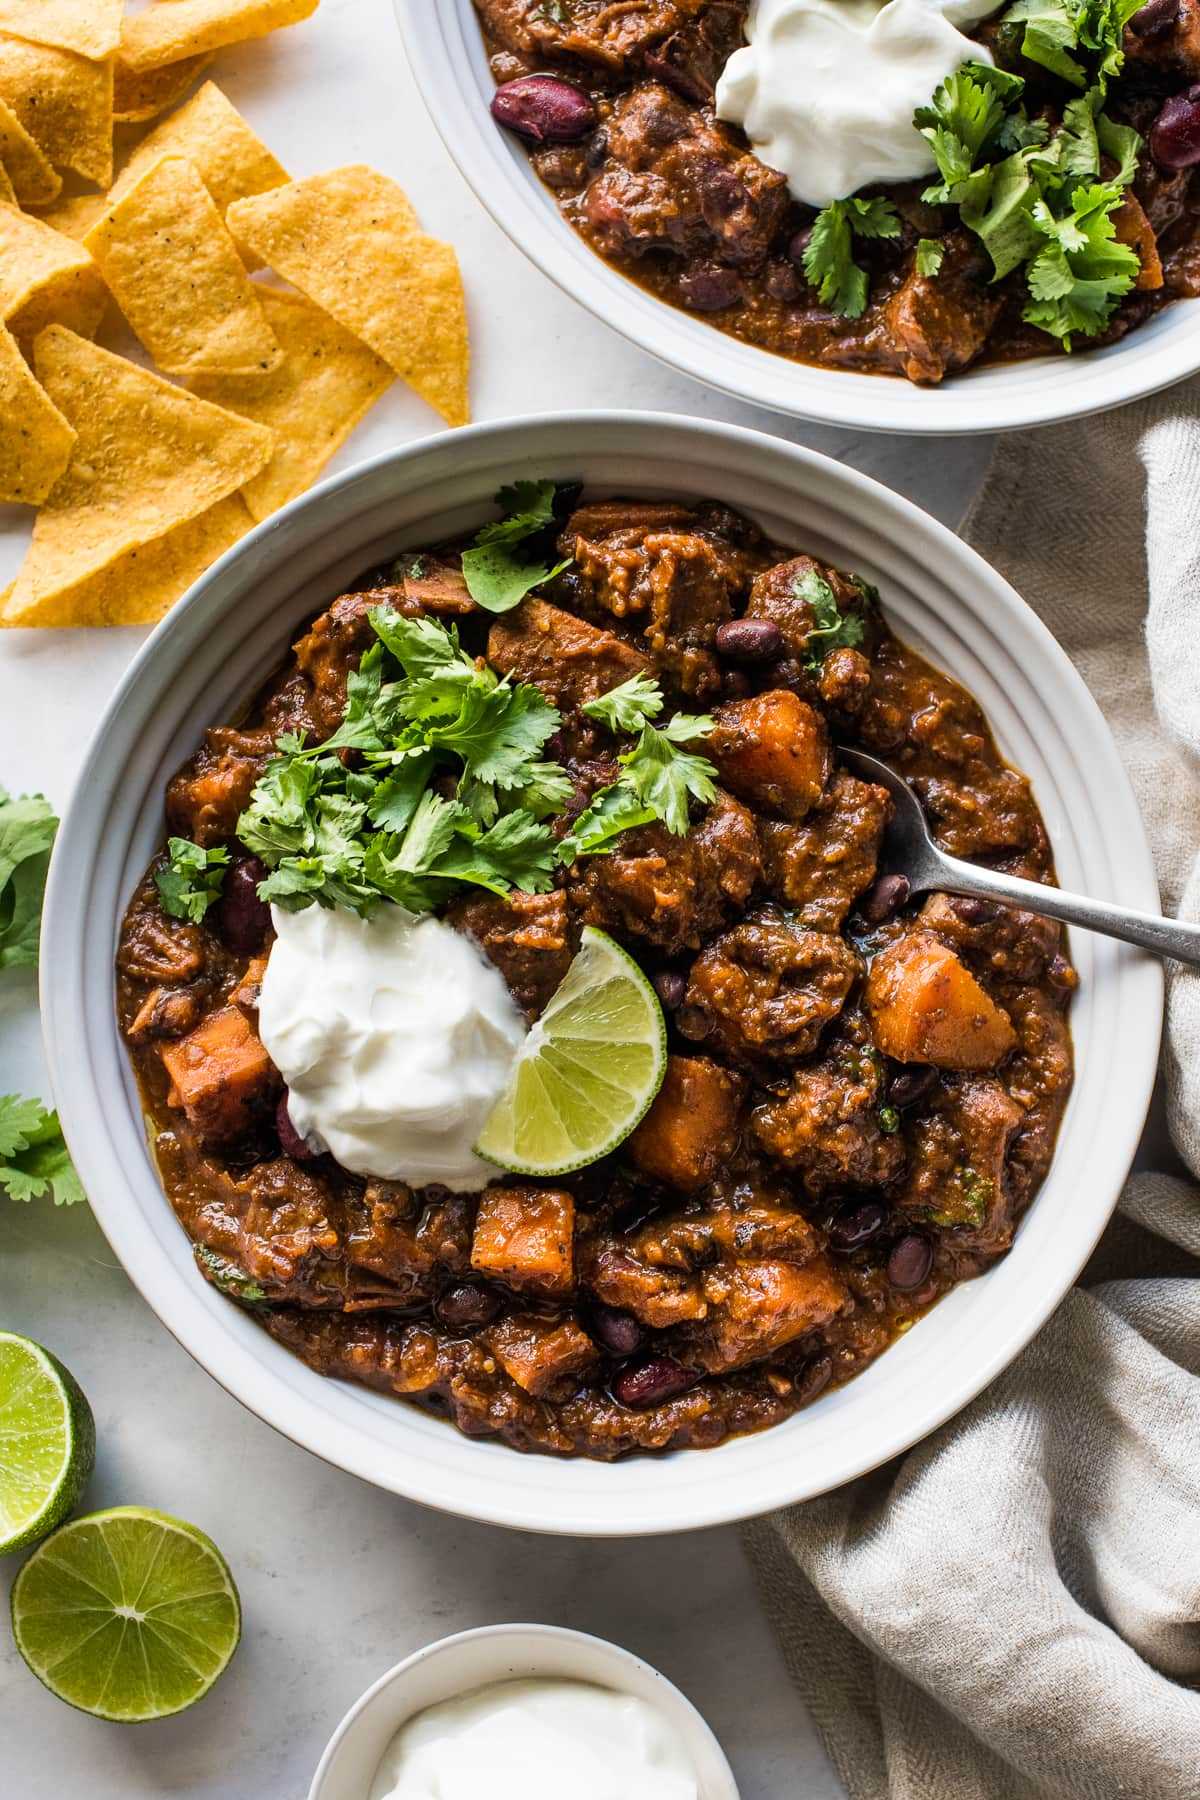 Pork chili in a bowl made from beans, sweet potatoes, pork shoulder, and chipotle spices.